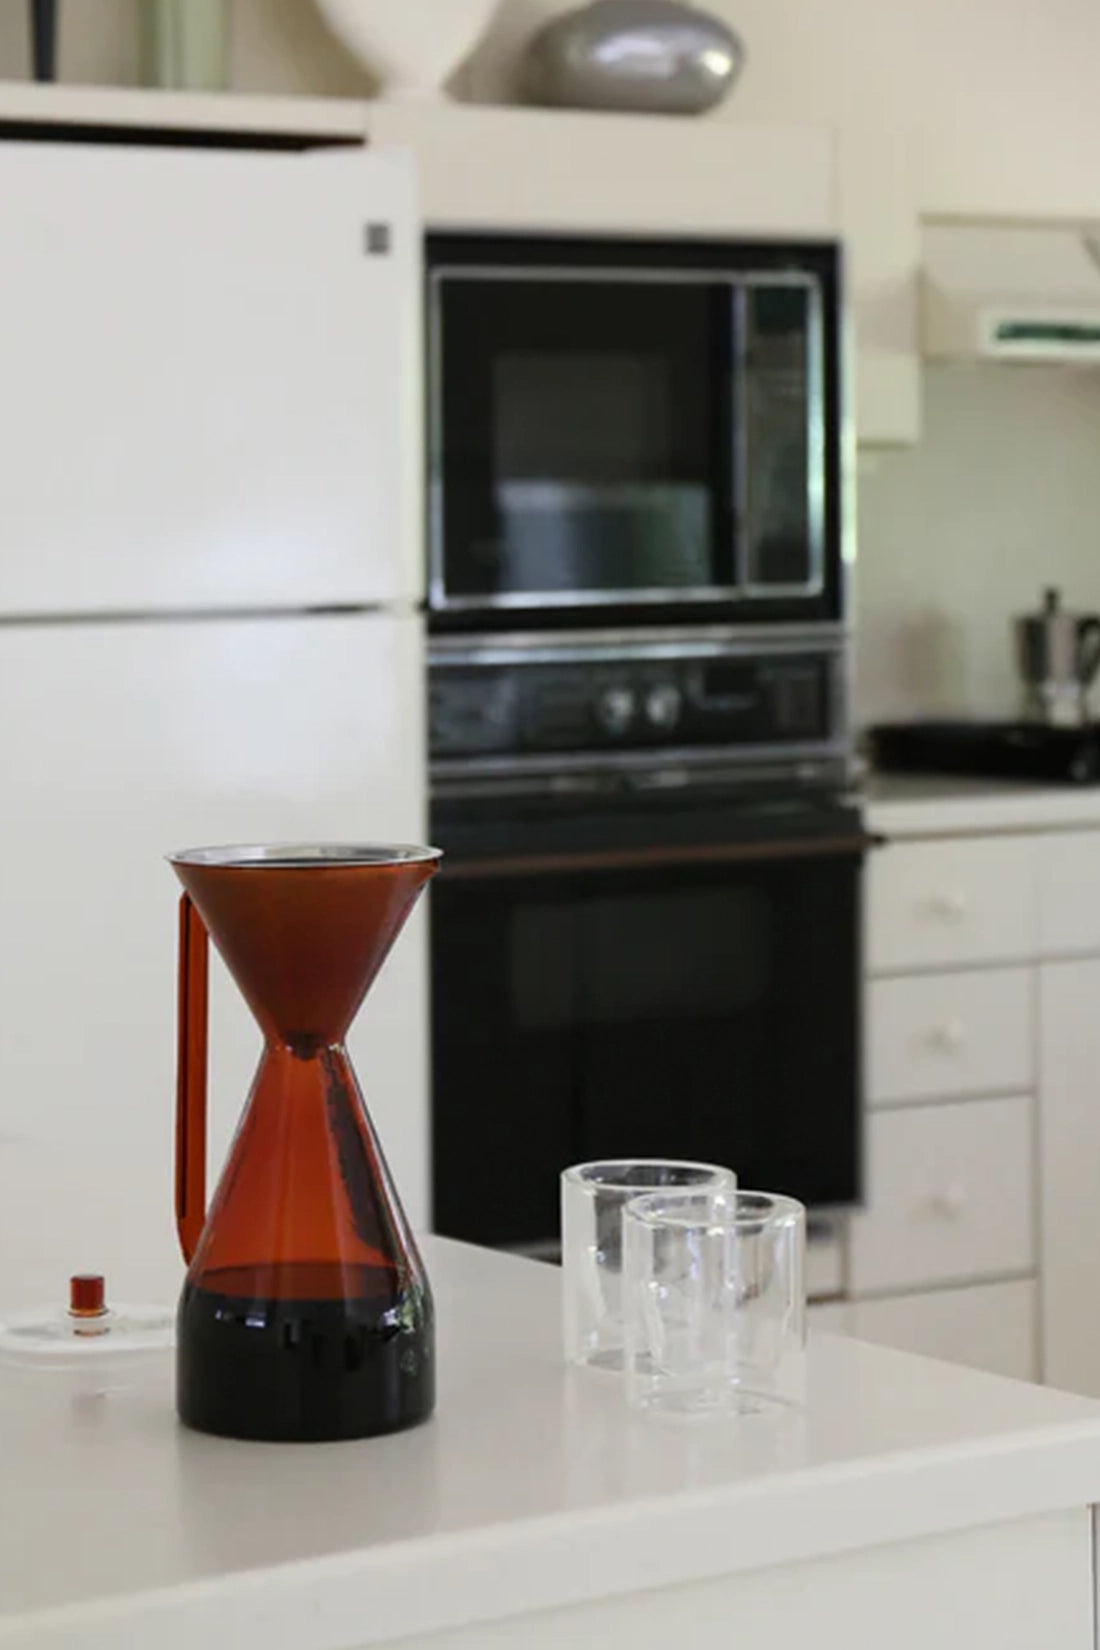 Pour Over Carafe - Amber